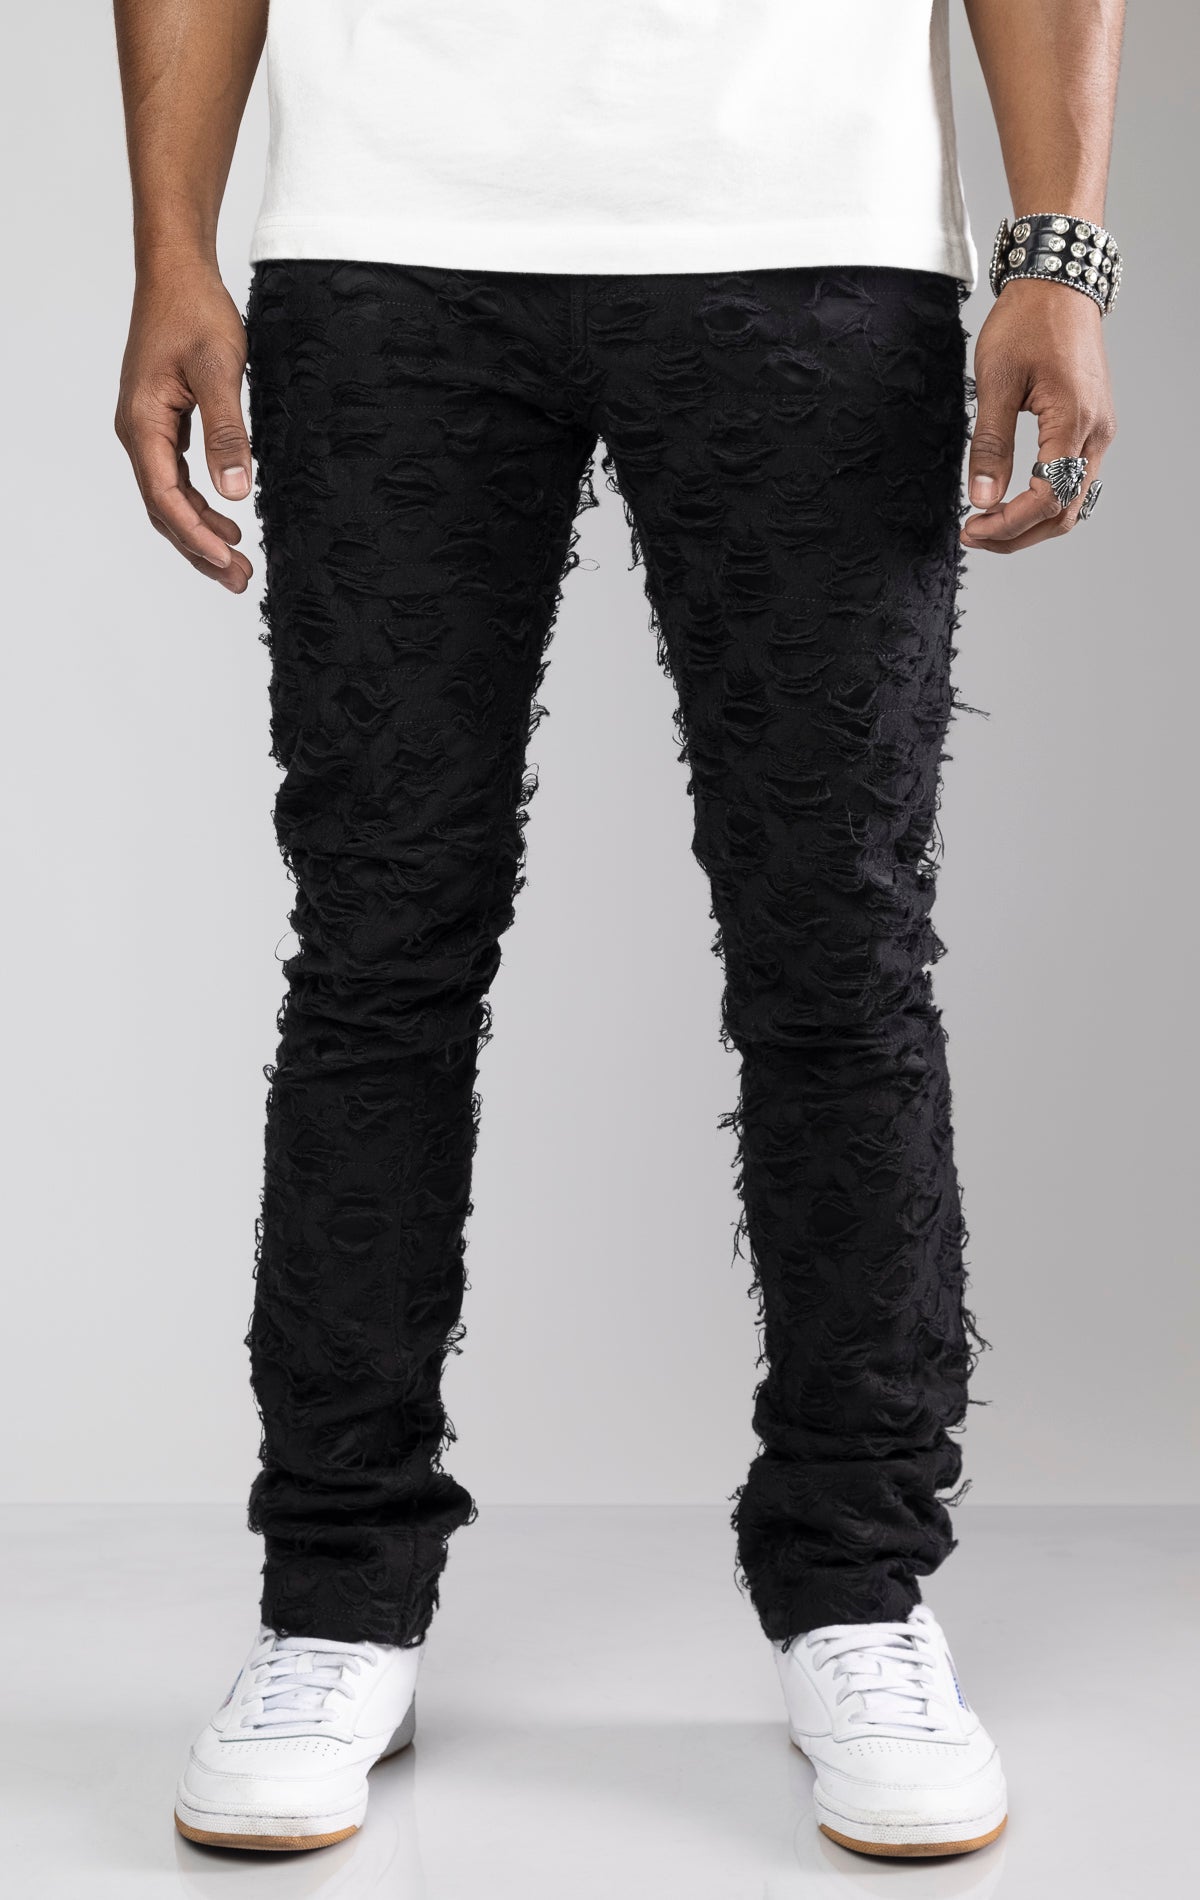 Stacked skinny pants in stretch twill with a ripped netting design throughout for a distressed look.